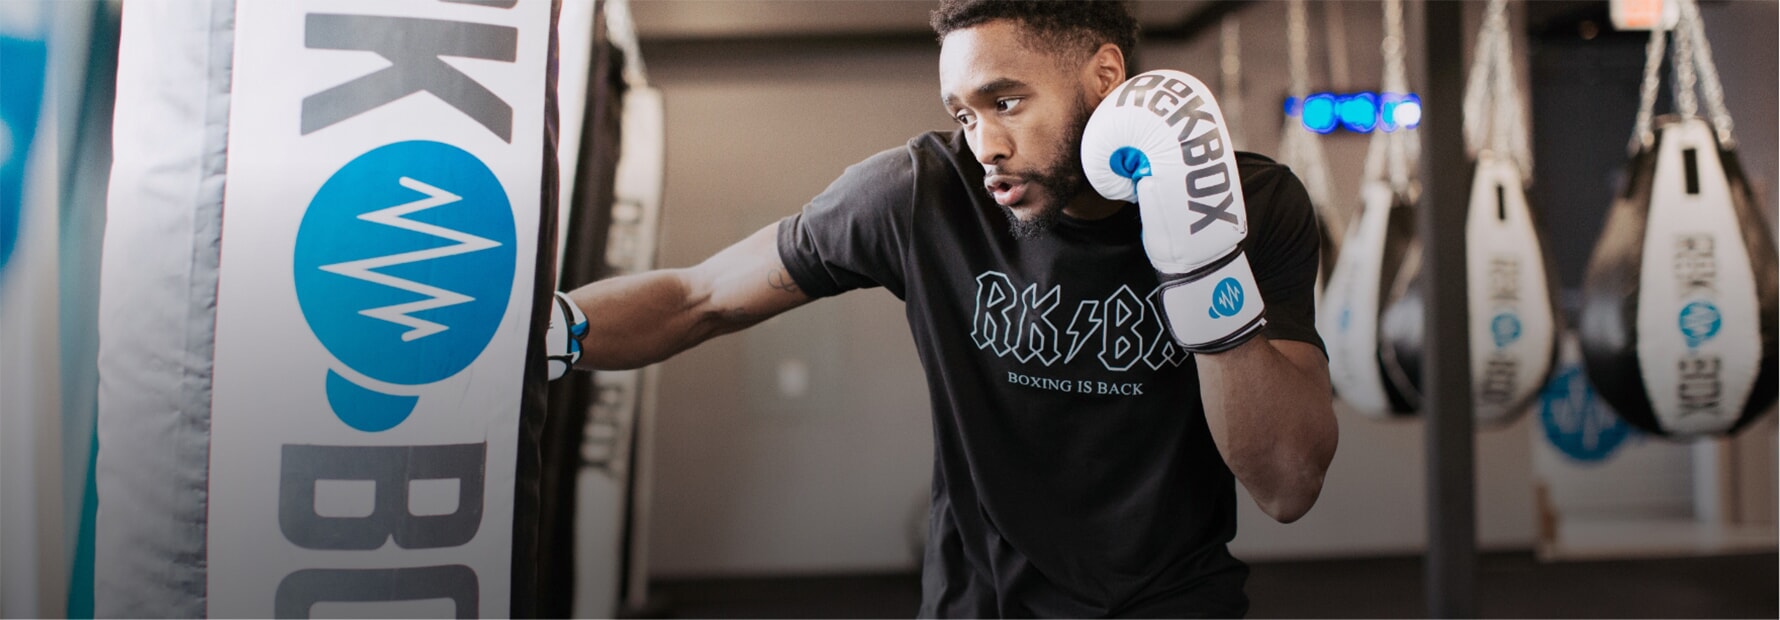 RockBox Fitness - Southlake: Read Reviews and Book Classes on